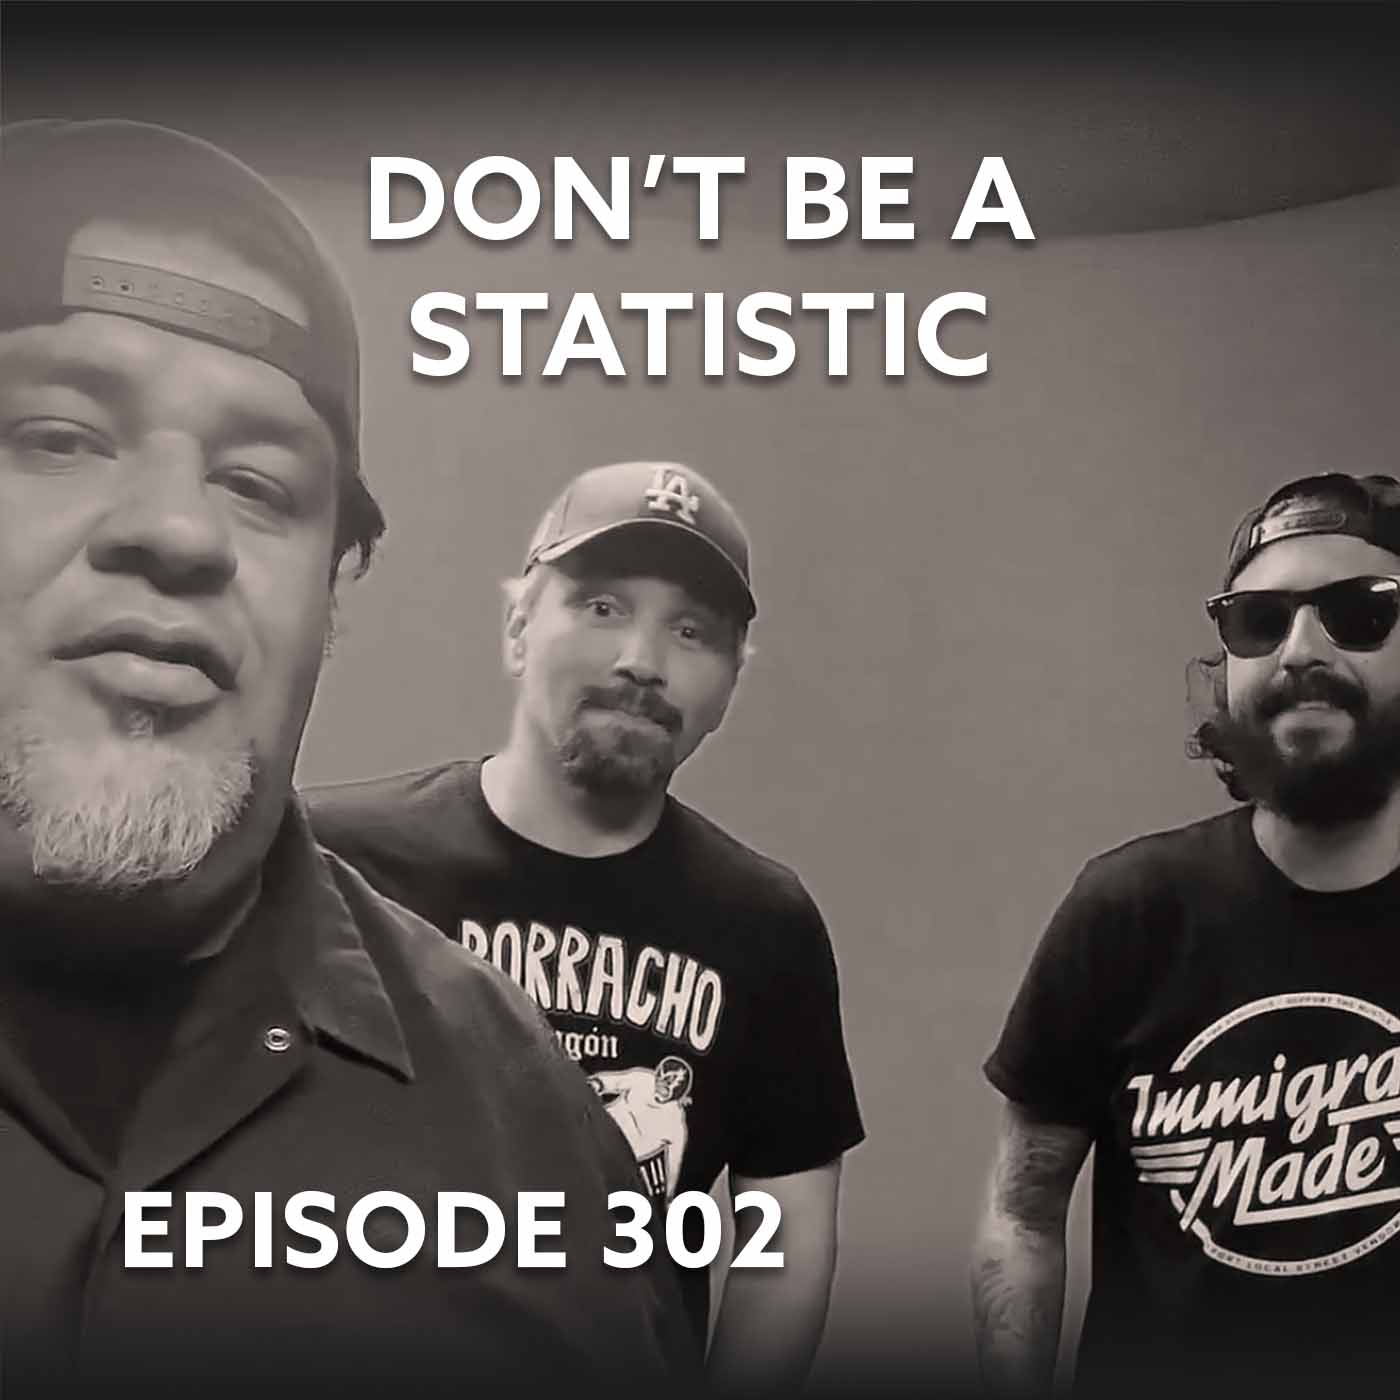 Episode 302 – Don’t be a Statistic